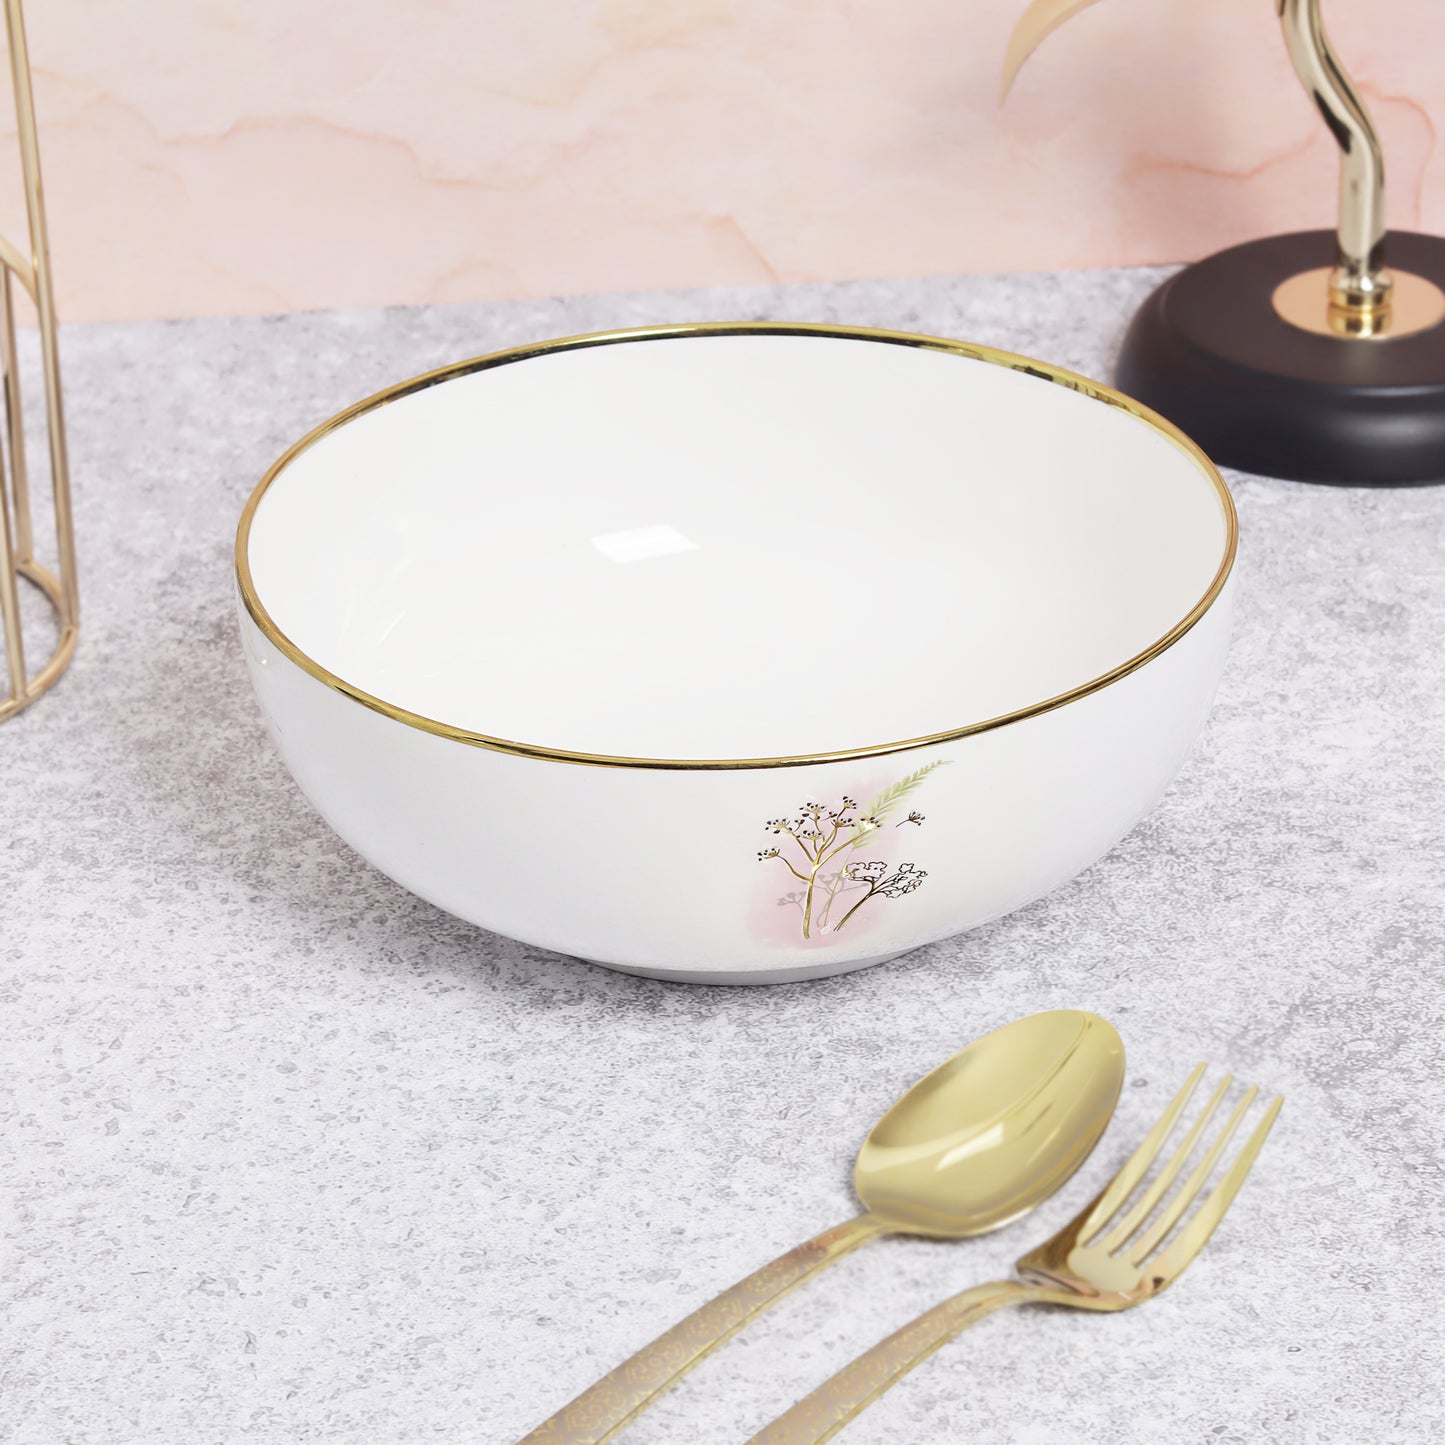 Ceramic set of 4 rice/salad plates and pasta bowls - elevate your dining experience with this stylish and versatile dinnerware collection